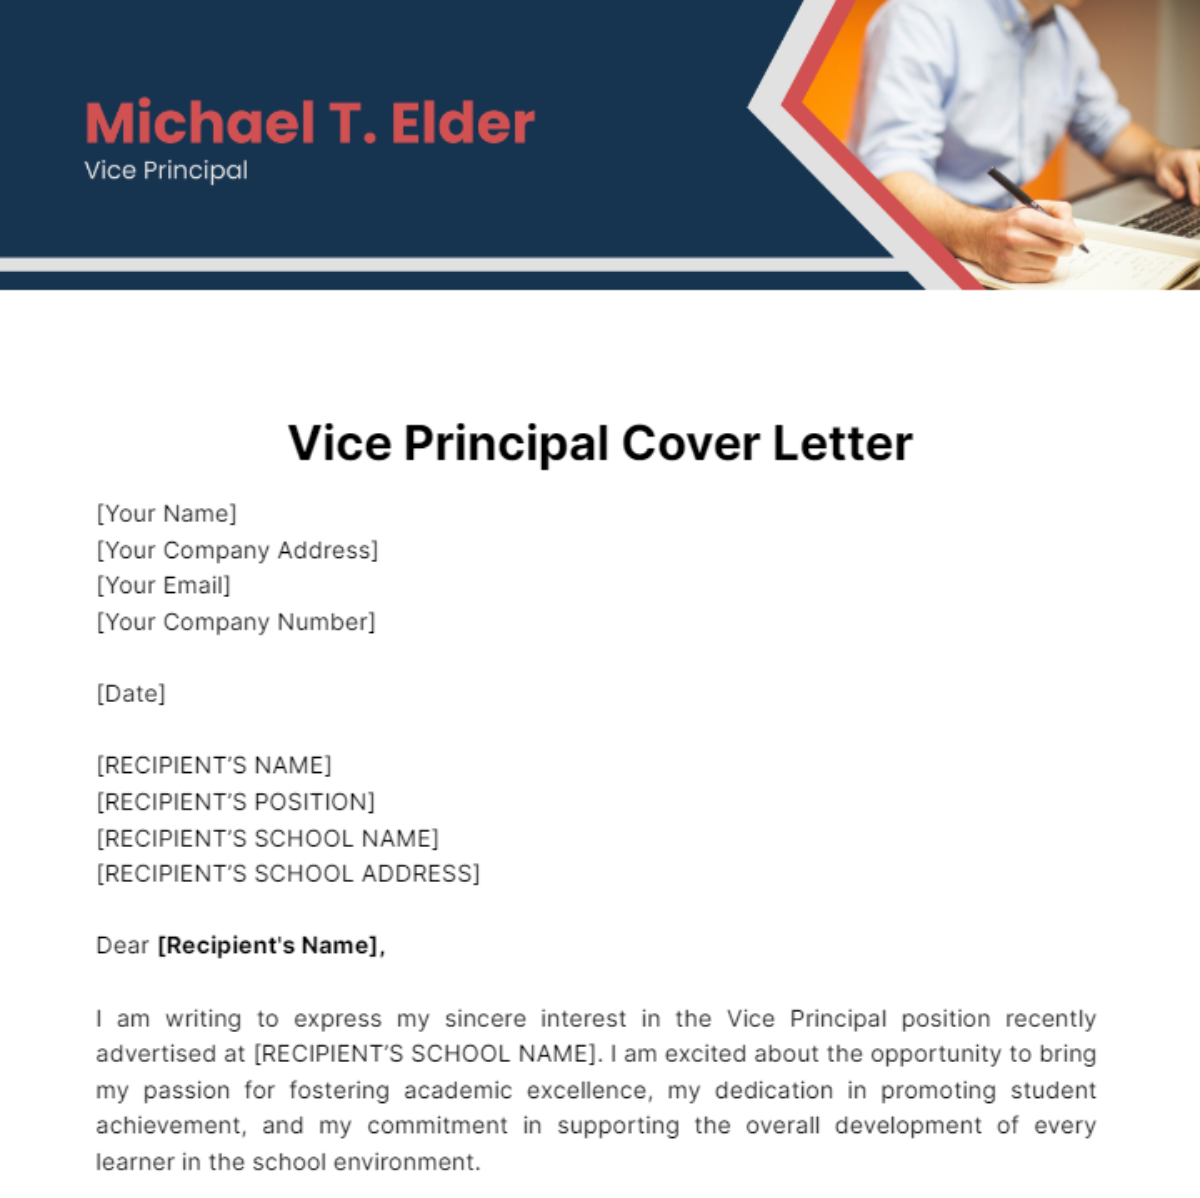 Vice Principal Cover Letter Template